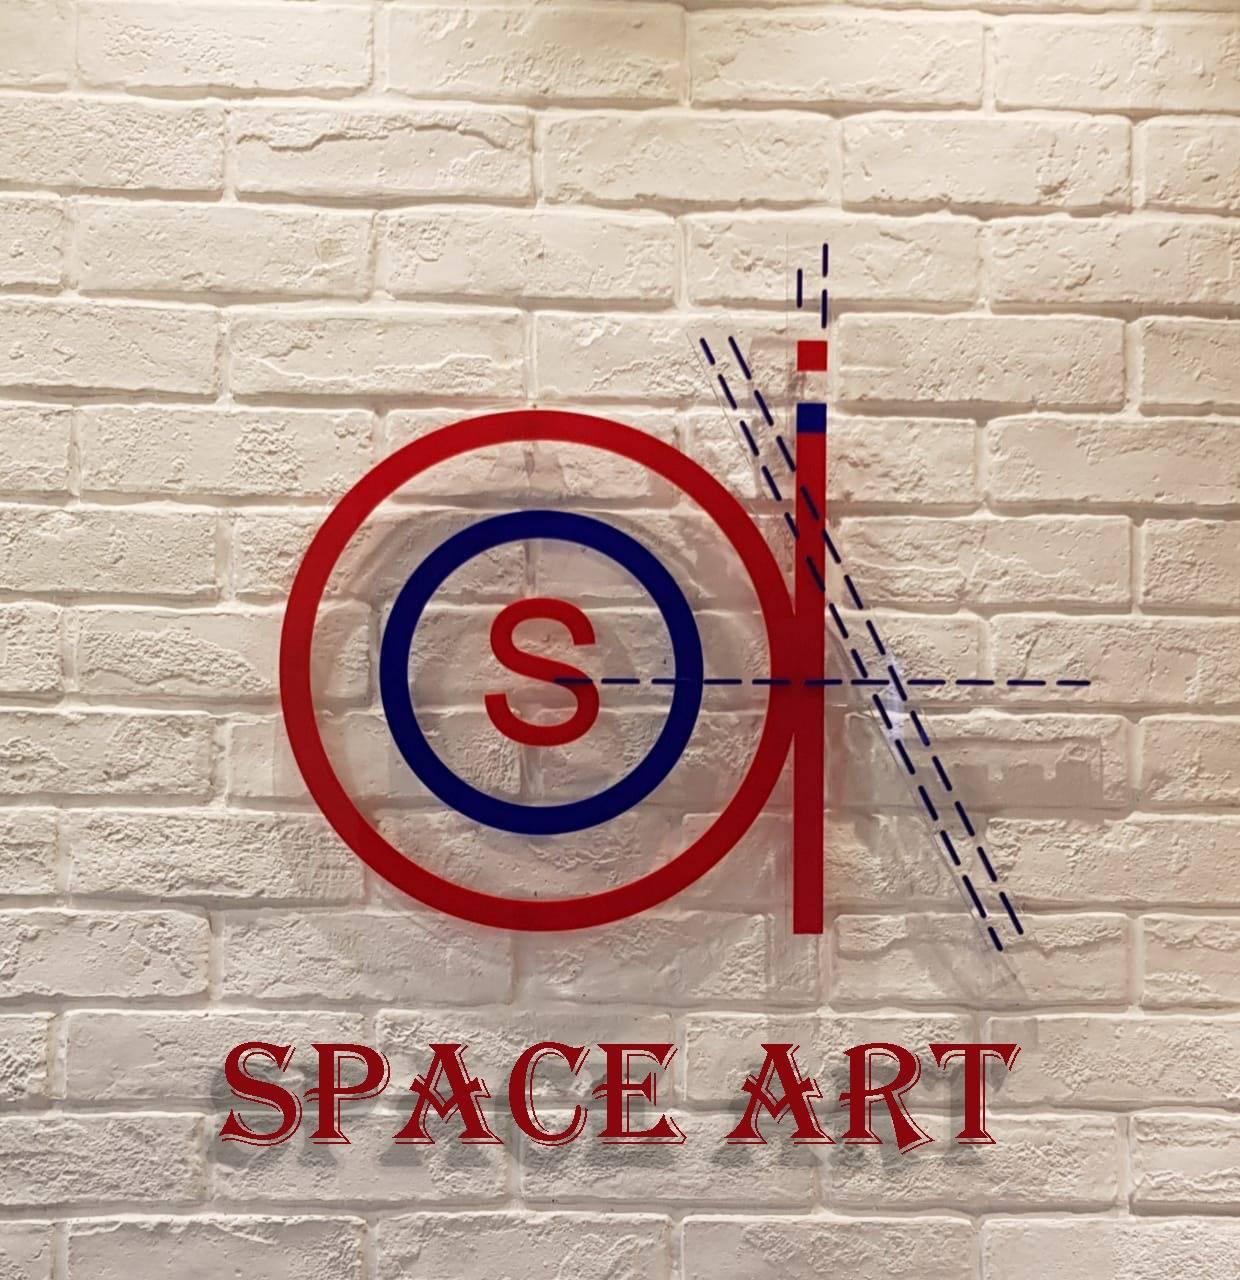 Space Art interior designers & Architects|Accounting Services|Professional Services